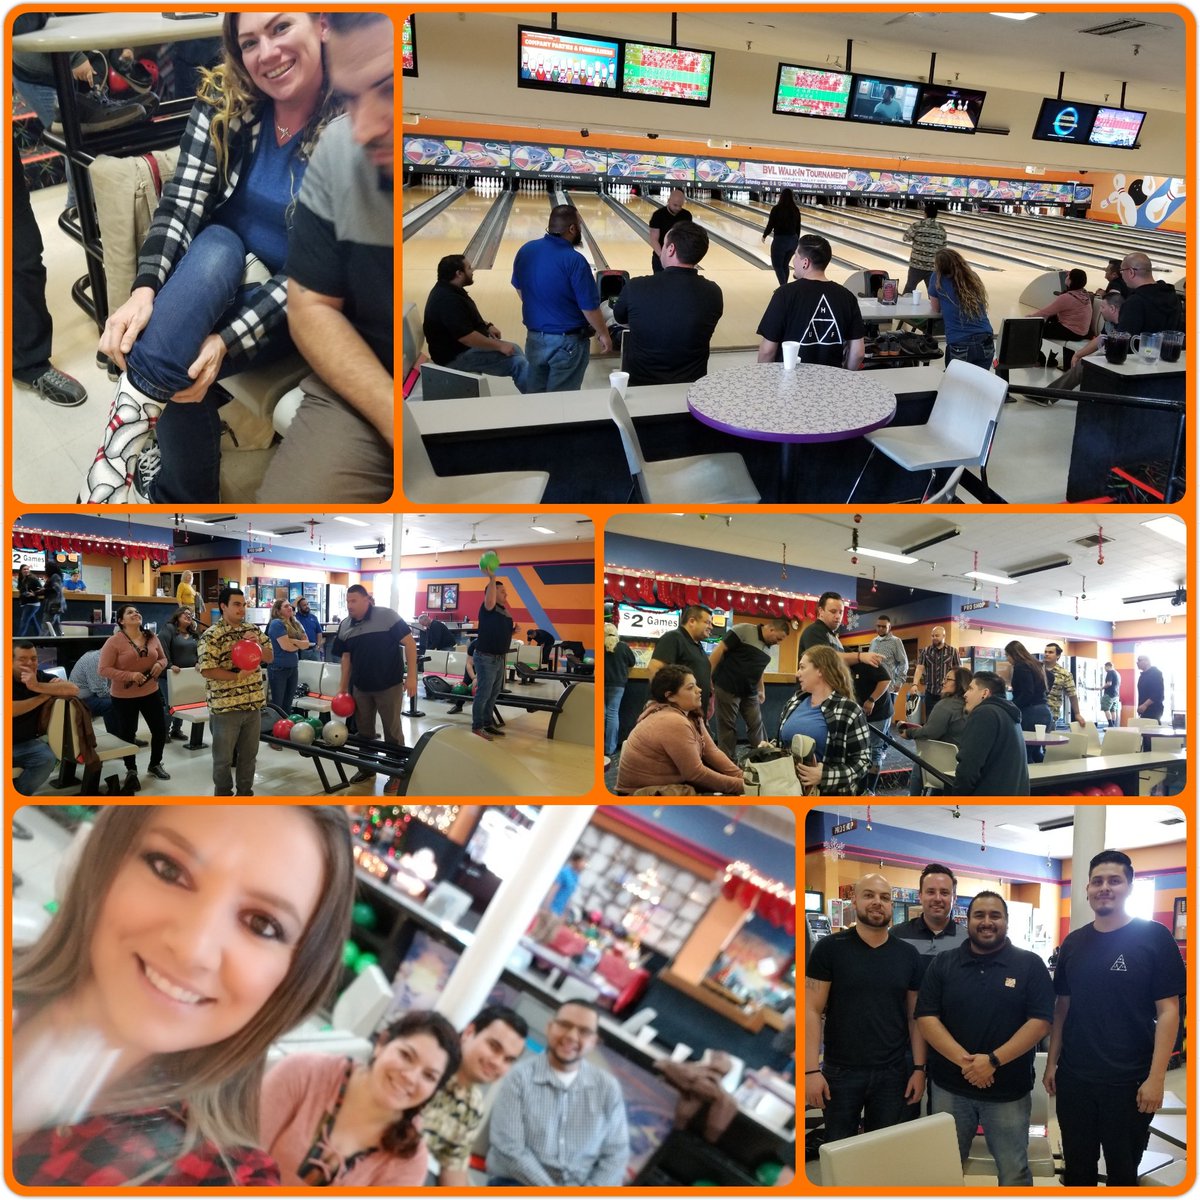 Happy Holidays from Oxnard Home Depot🎄Dep. Supervisor's Holiday breakfast with a little 🎳 fun to end our amazing day 😉 Thank you SM Rian for such an awesome 2018 🥂 Cheers to 2019 💪Thanks to our Amazing DSs for all your hard work and Outstanding 2018... Time to crush 2019👌